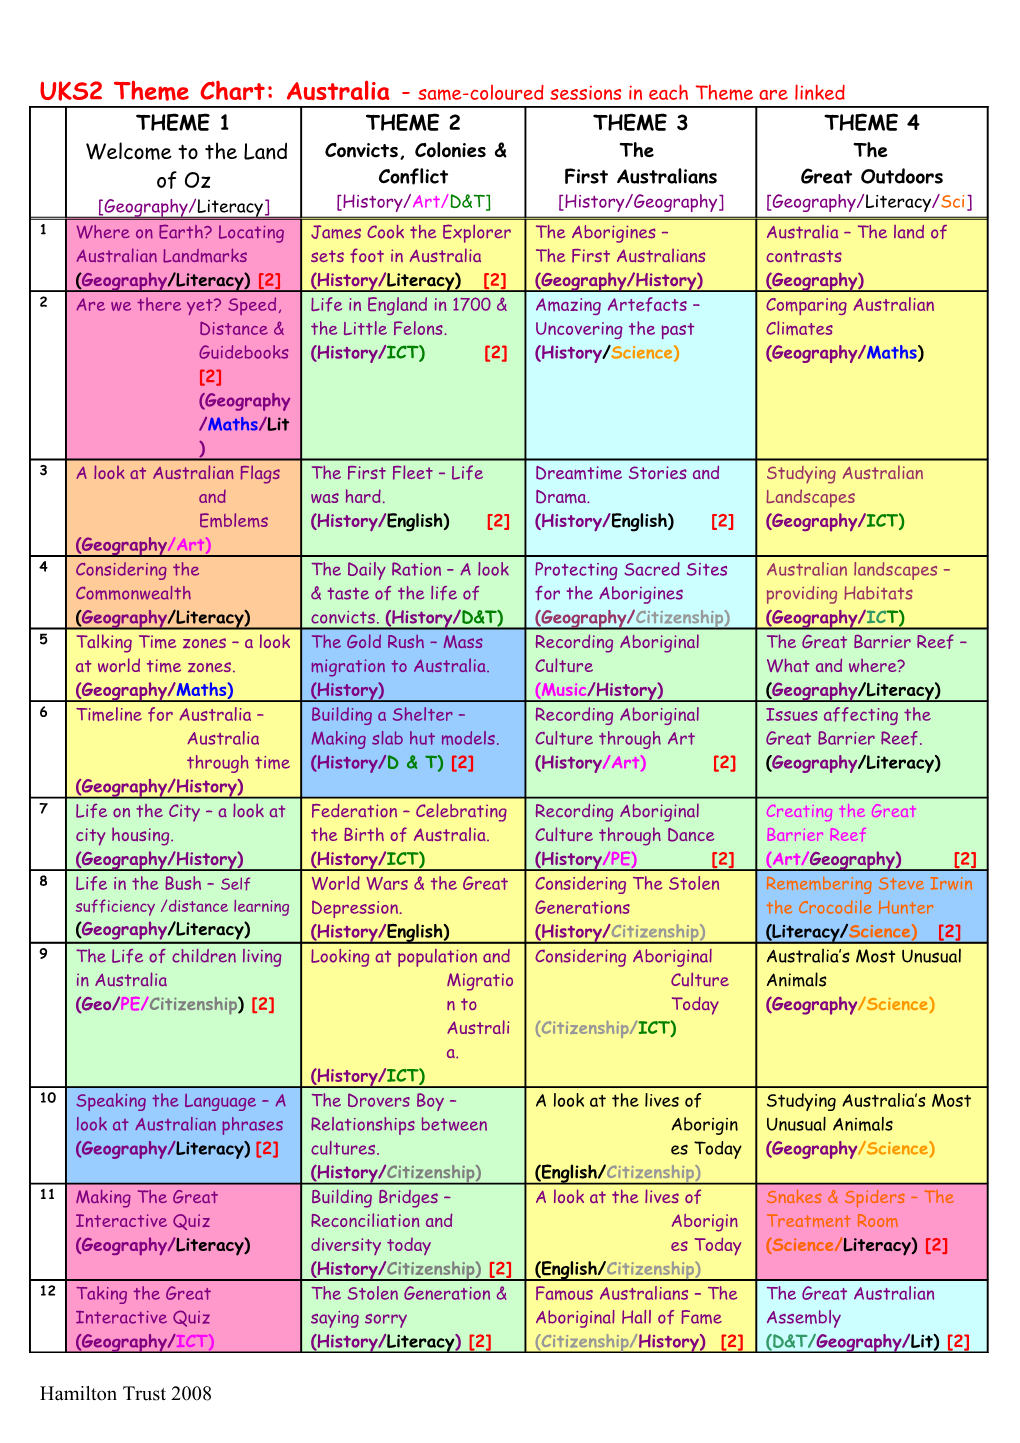 UKS2 Theme Chart: Australia - Same-Coloured Sessions in Each Theme Are Linked